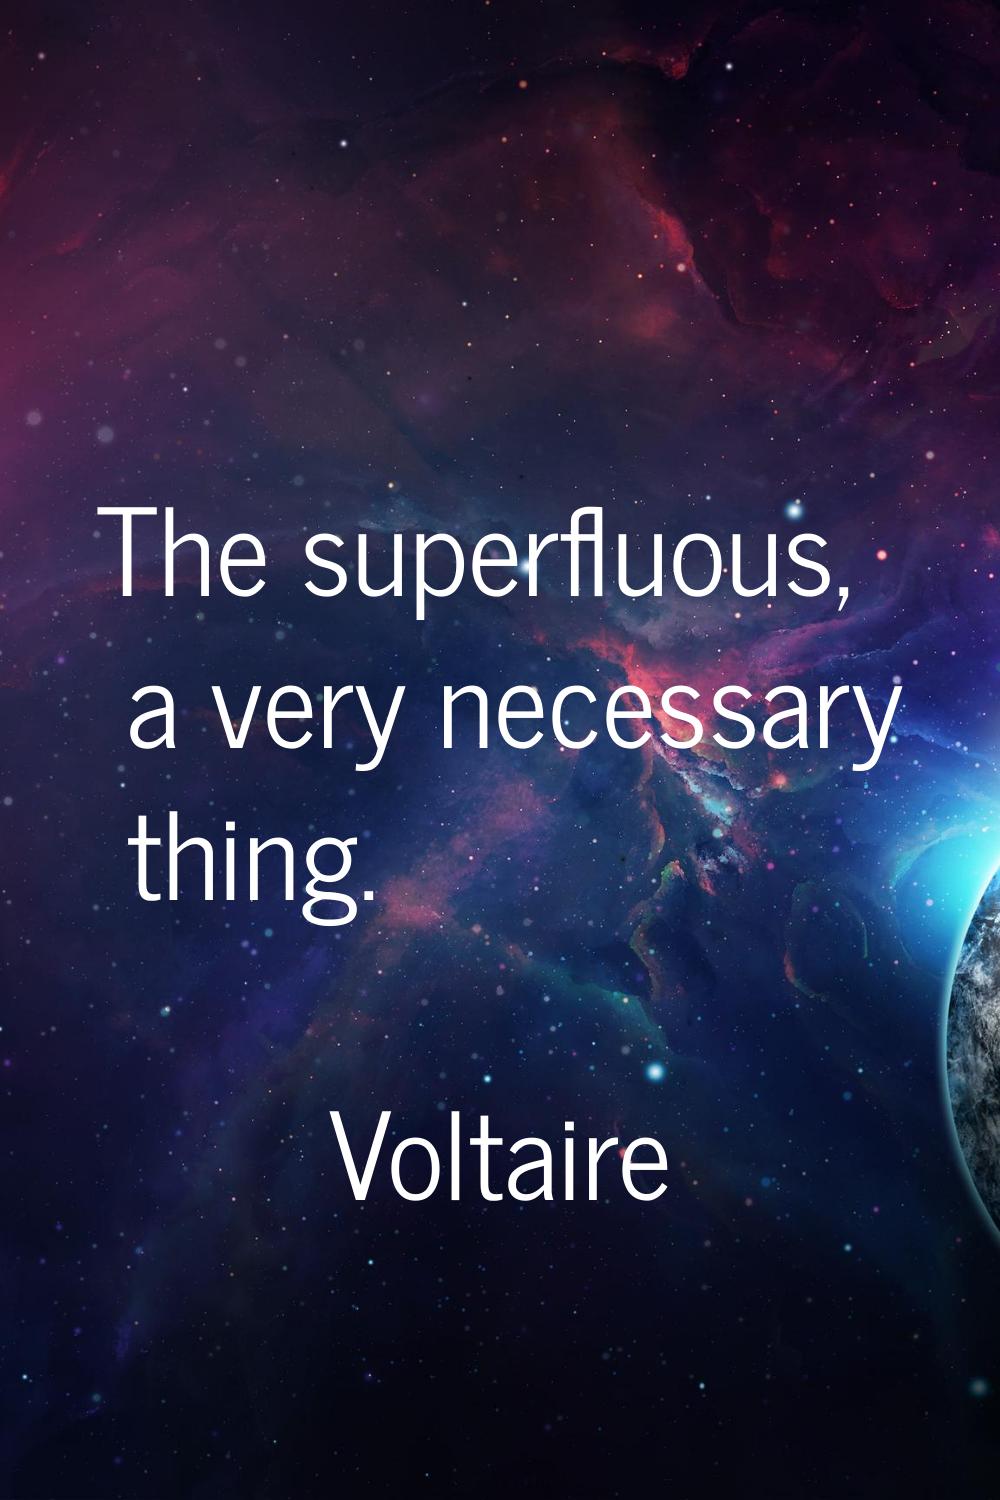 The superfluous, a very necessary thing.